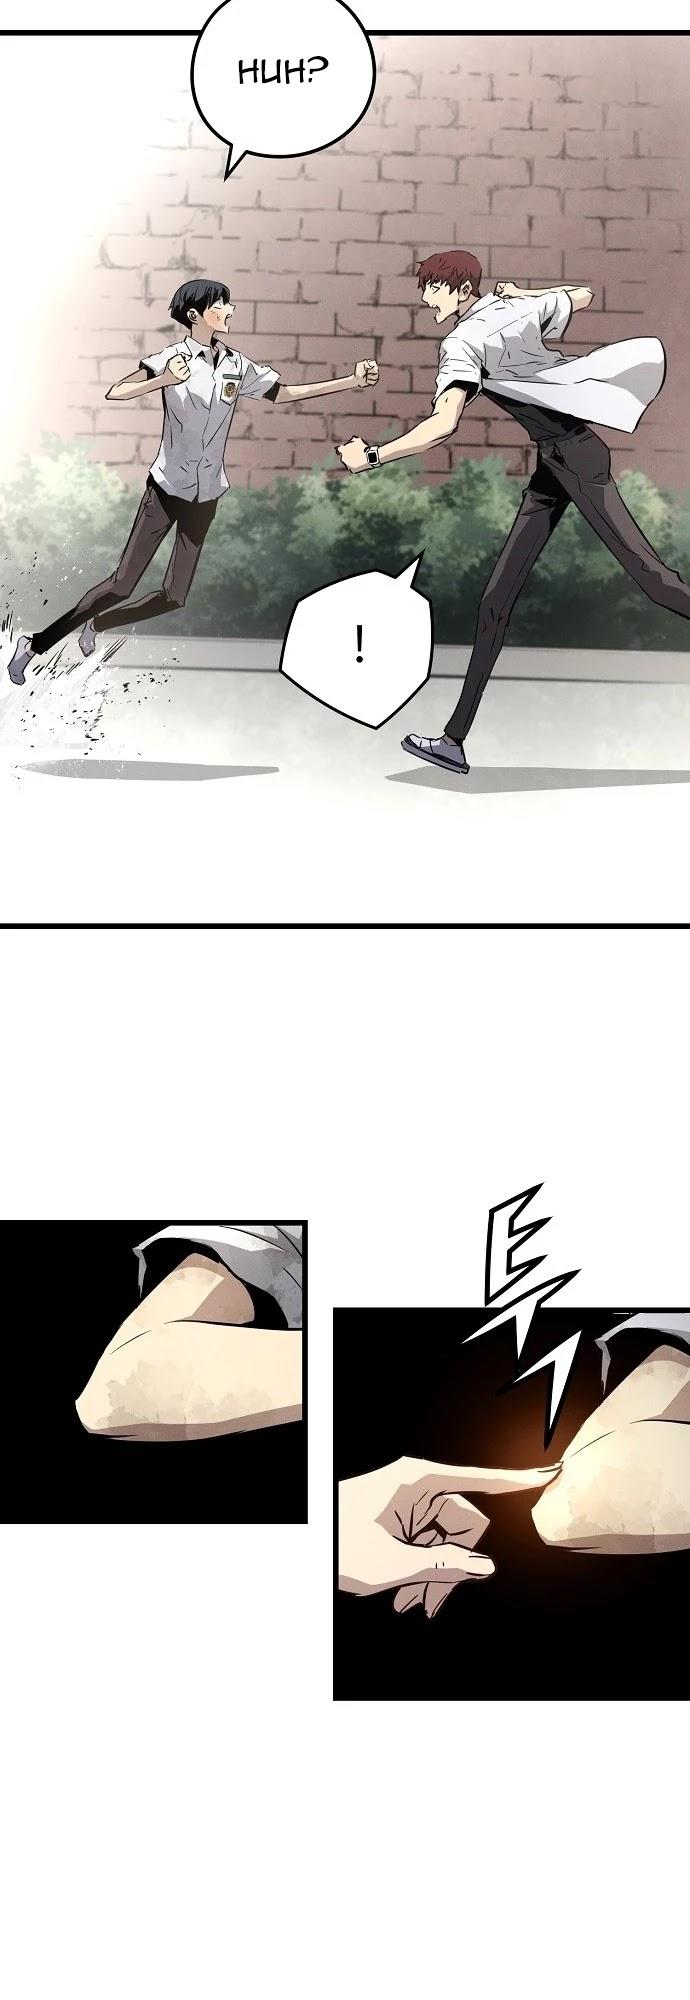 The Breaker: Eternal Force Chapter 1 page 68 - 